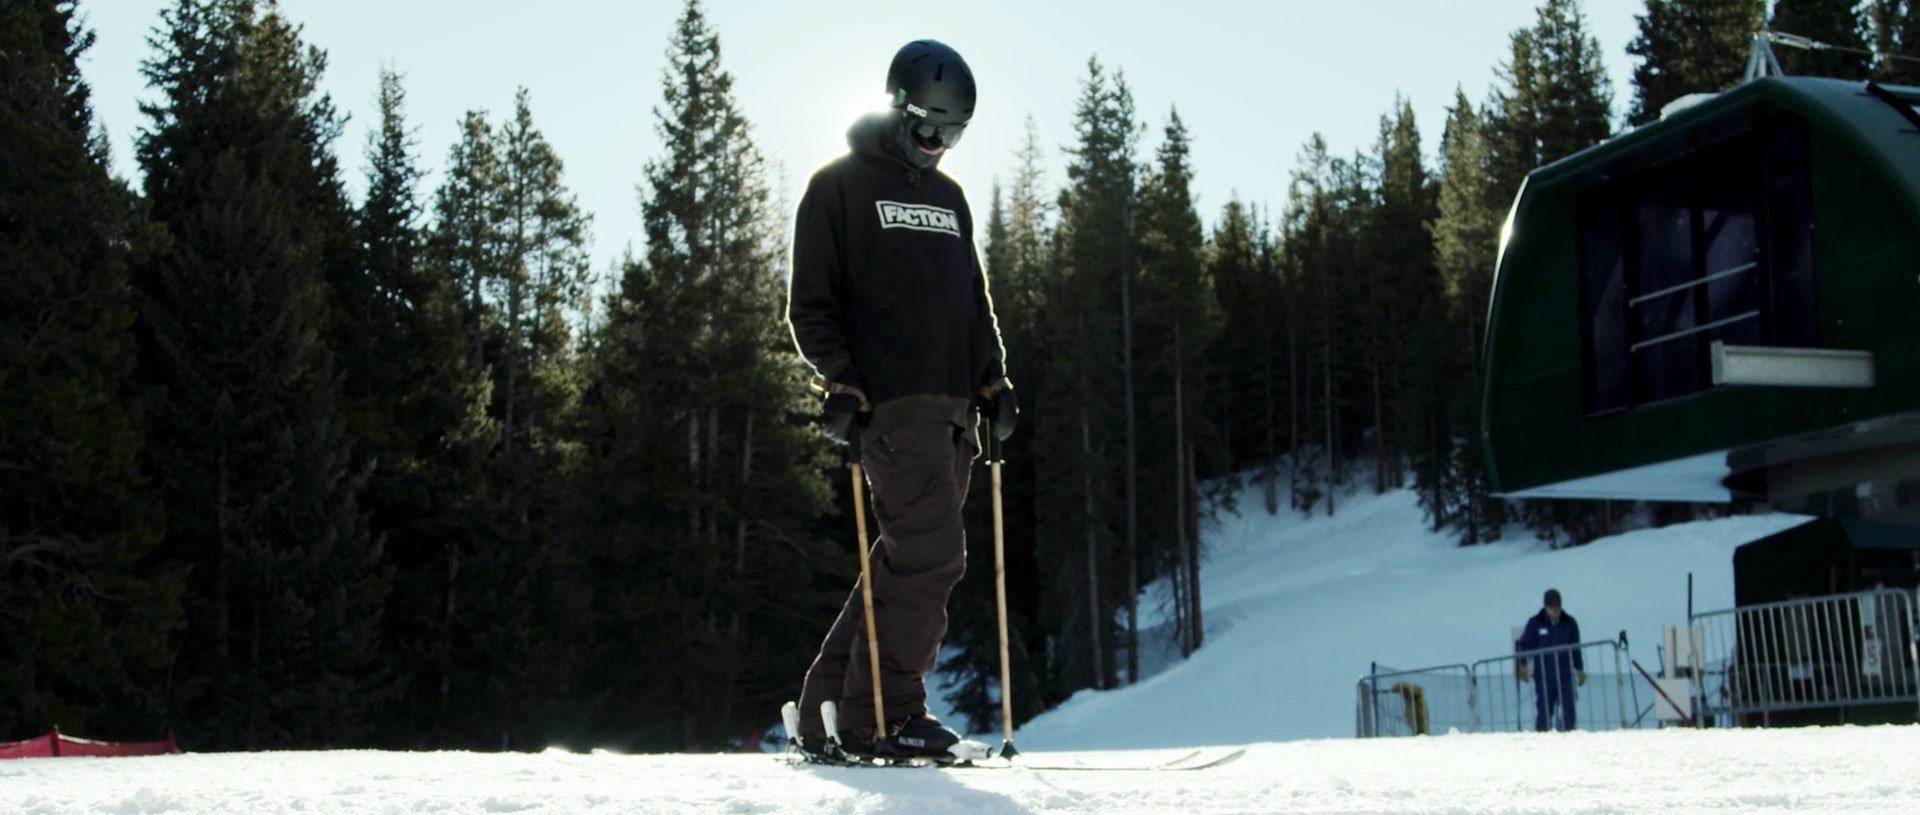 Sparetime - One of the hottest free style park skier right now, ALex Hall.